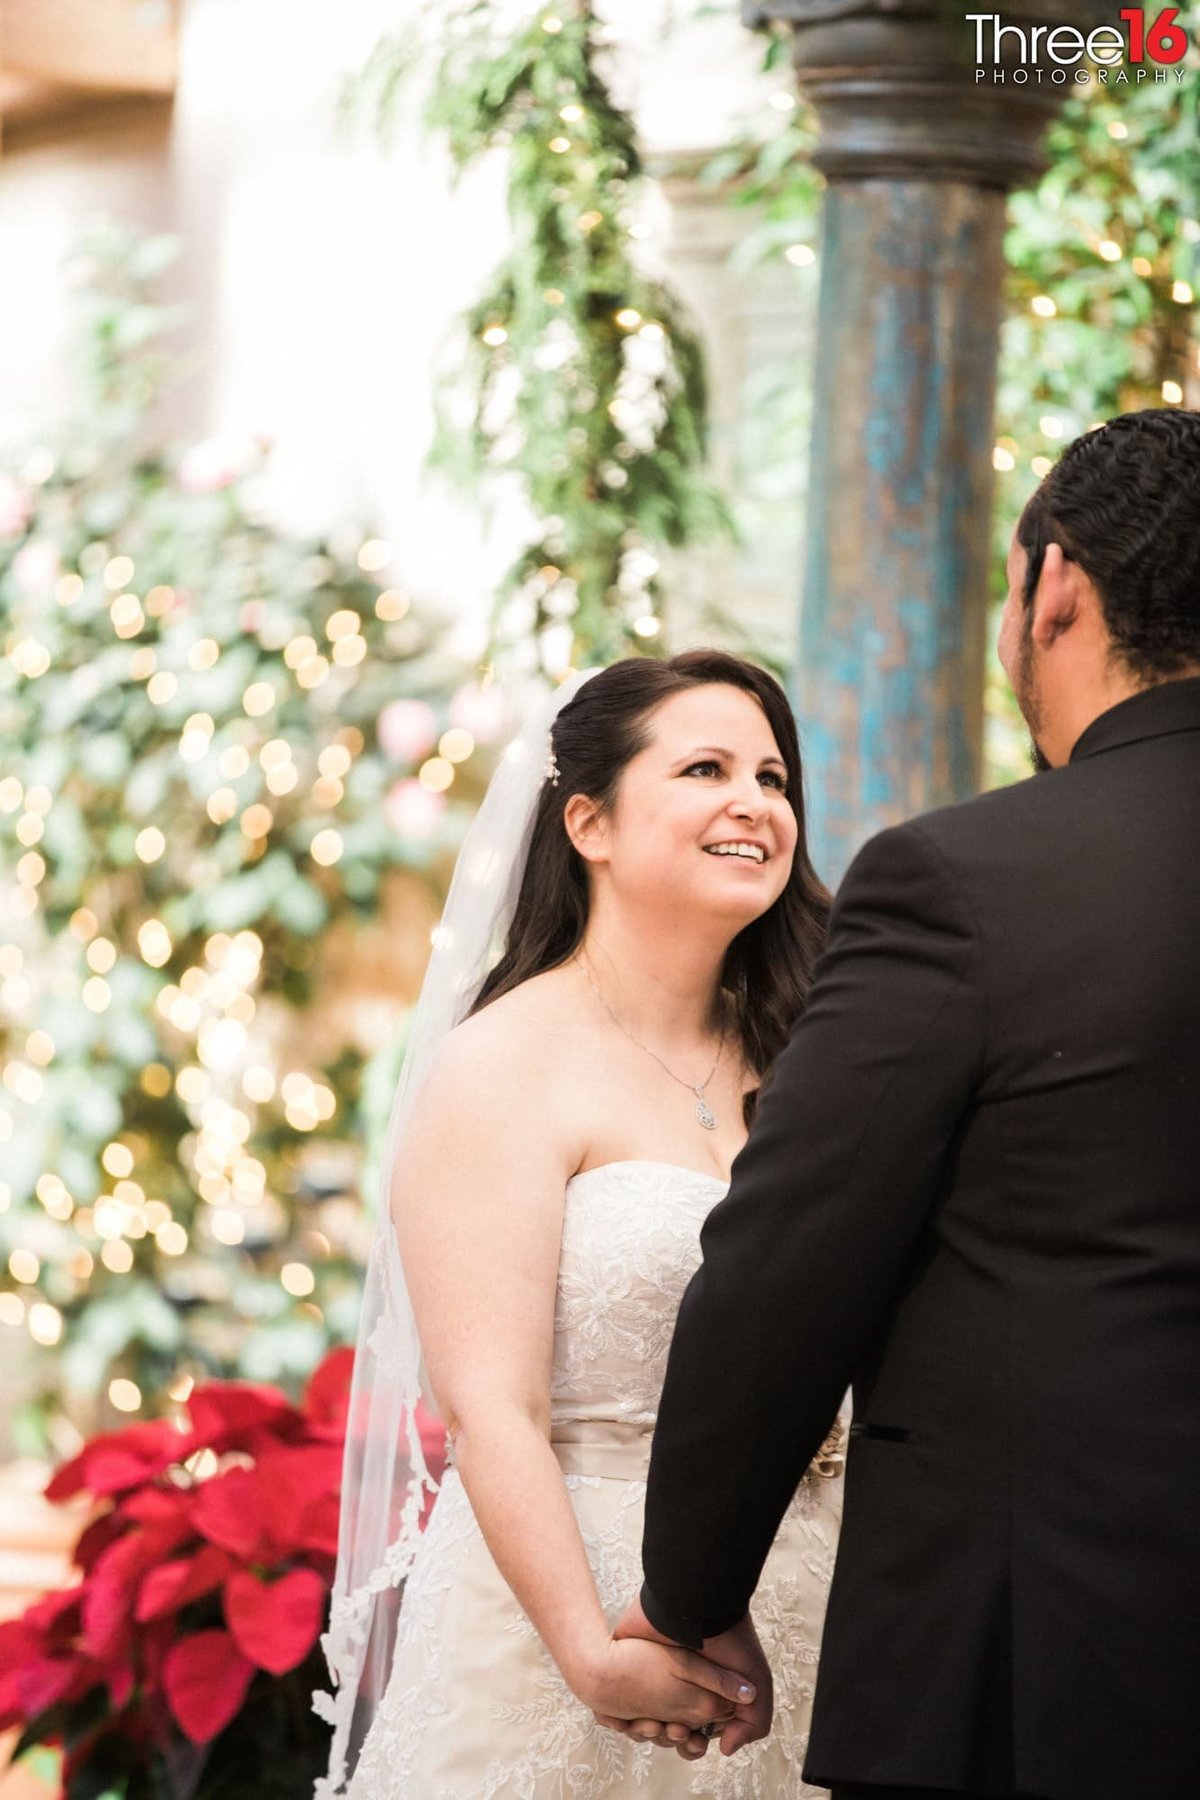 Bride smiles at her Groom during the ceremony